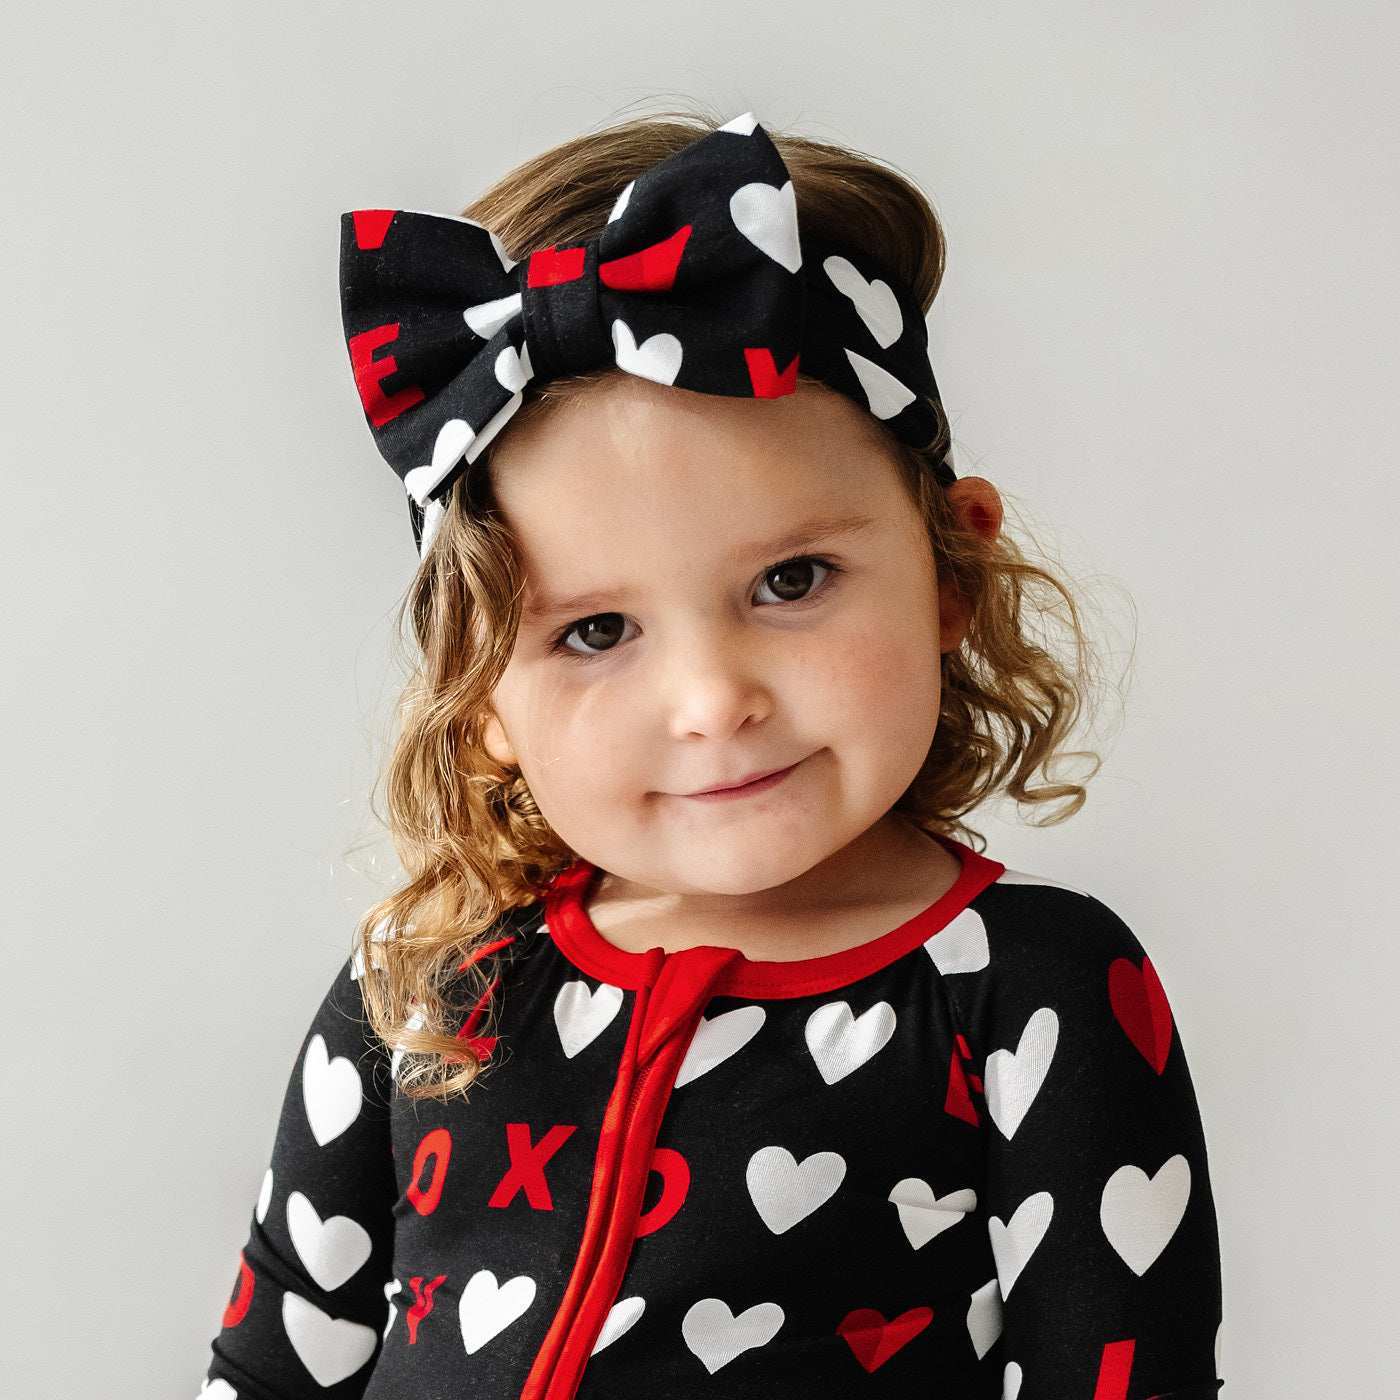 Close up image of a child wearing a Black XOXO luxe bow headband and matching zippy